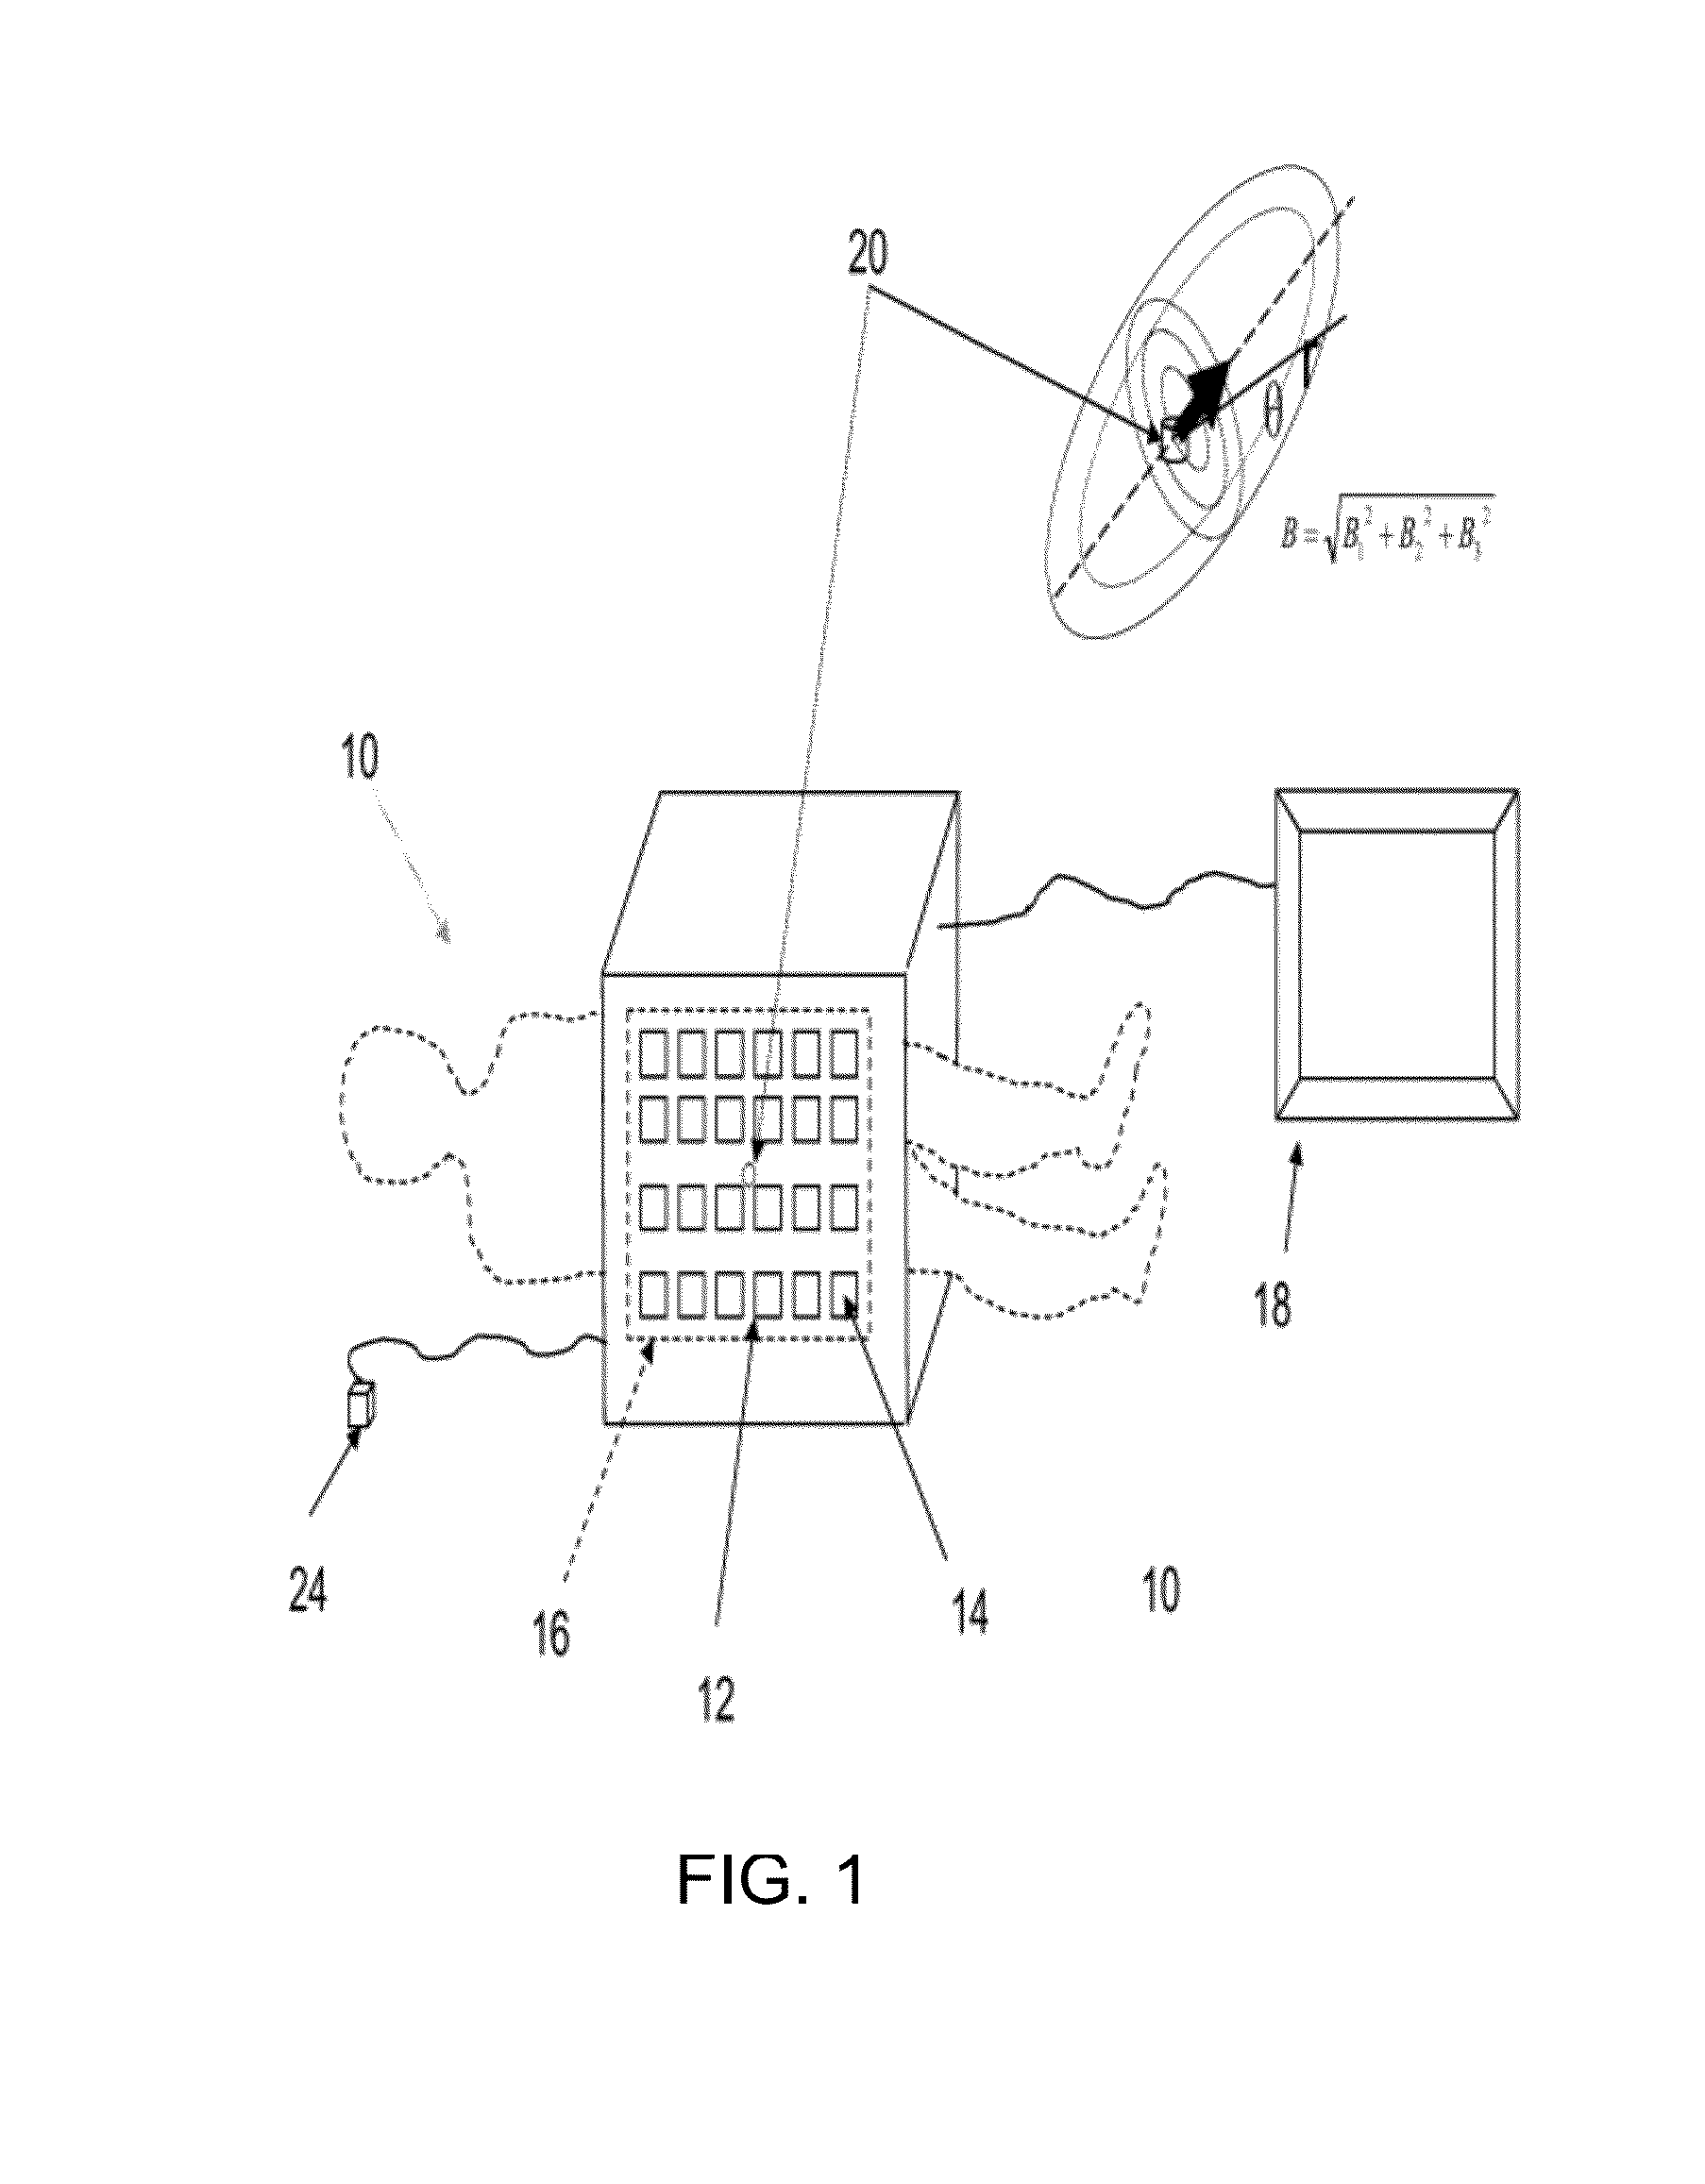 Computer-implemented system and method for determining the position of a remote object